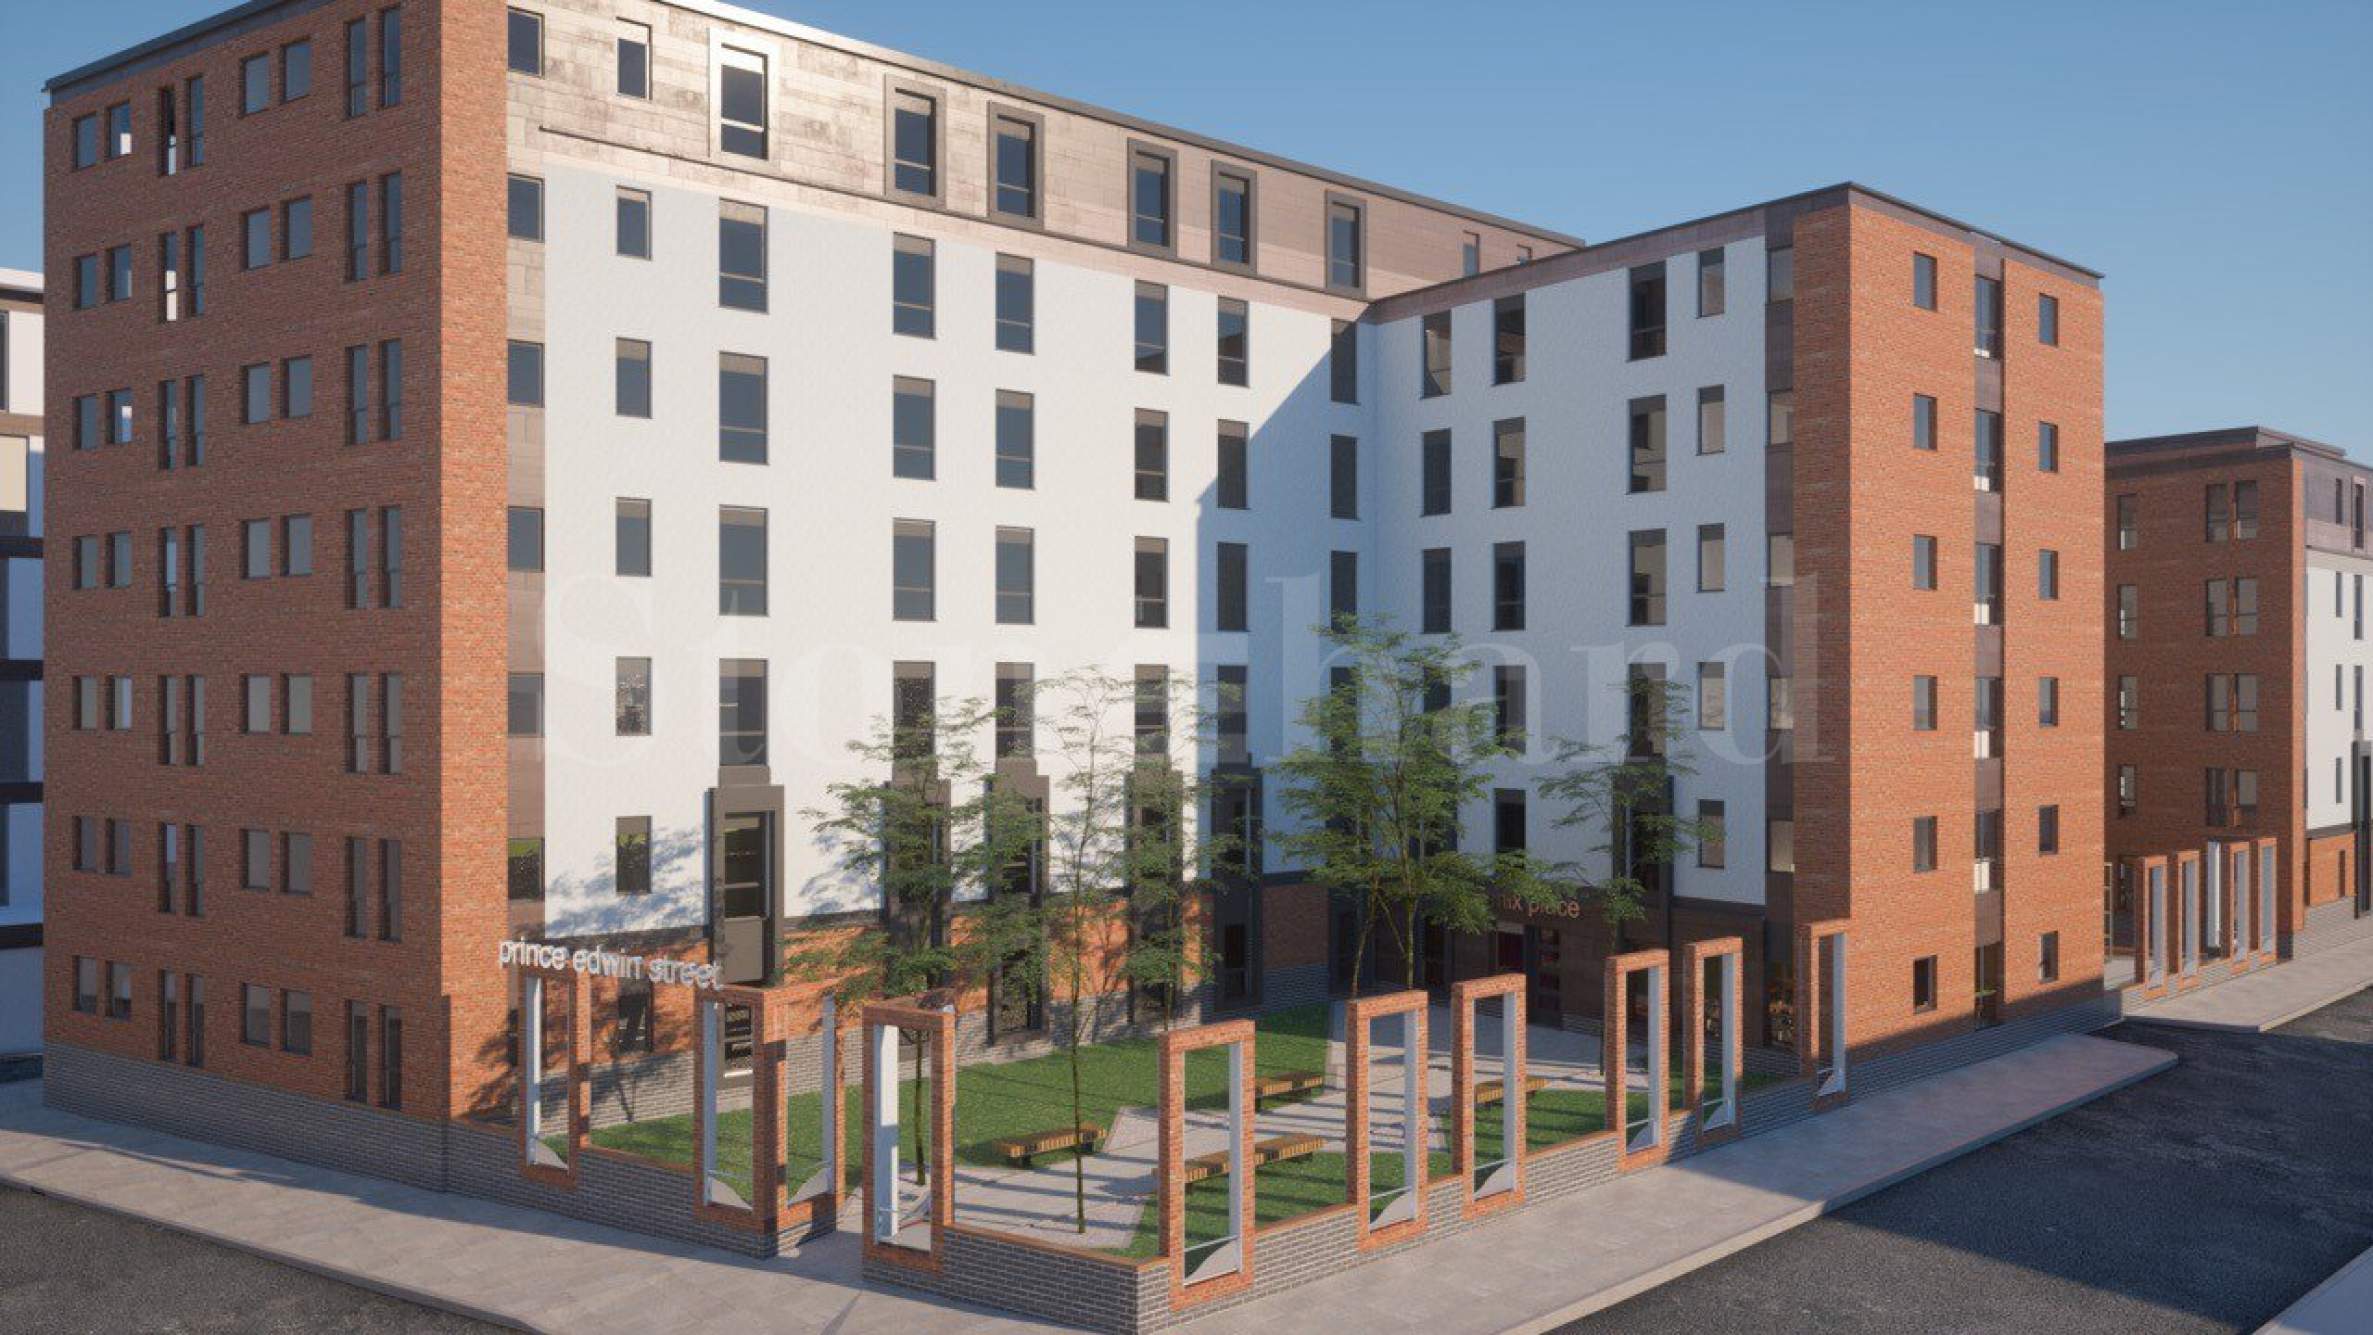 Purpose built student accommodation with high net yield1 - Stonehard